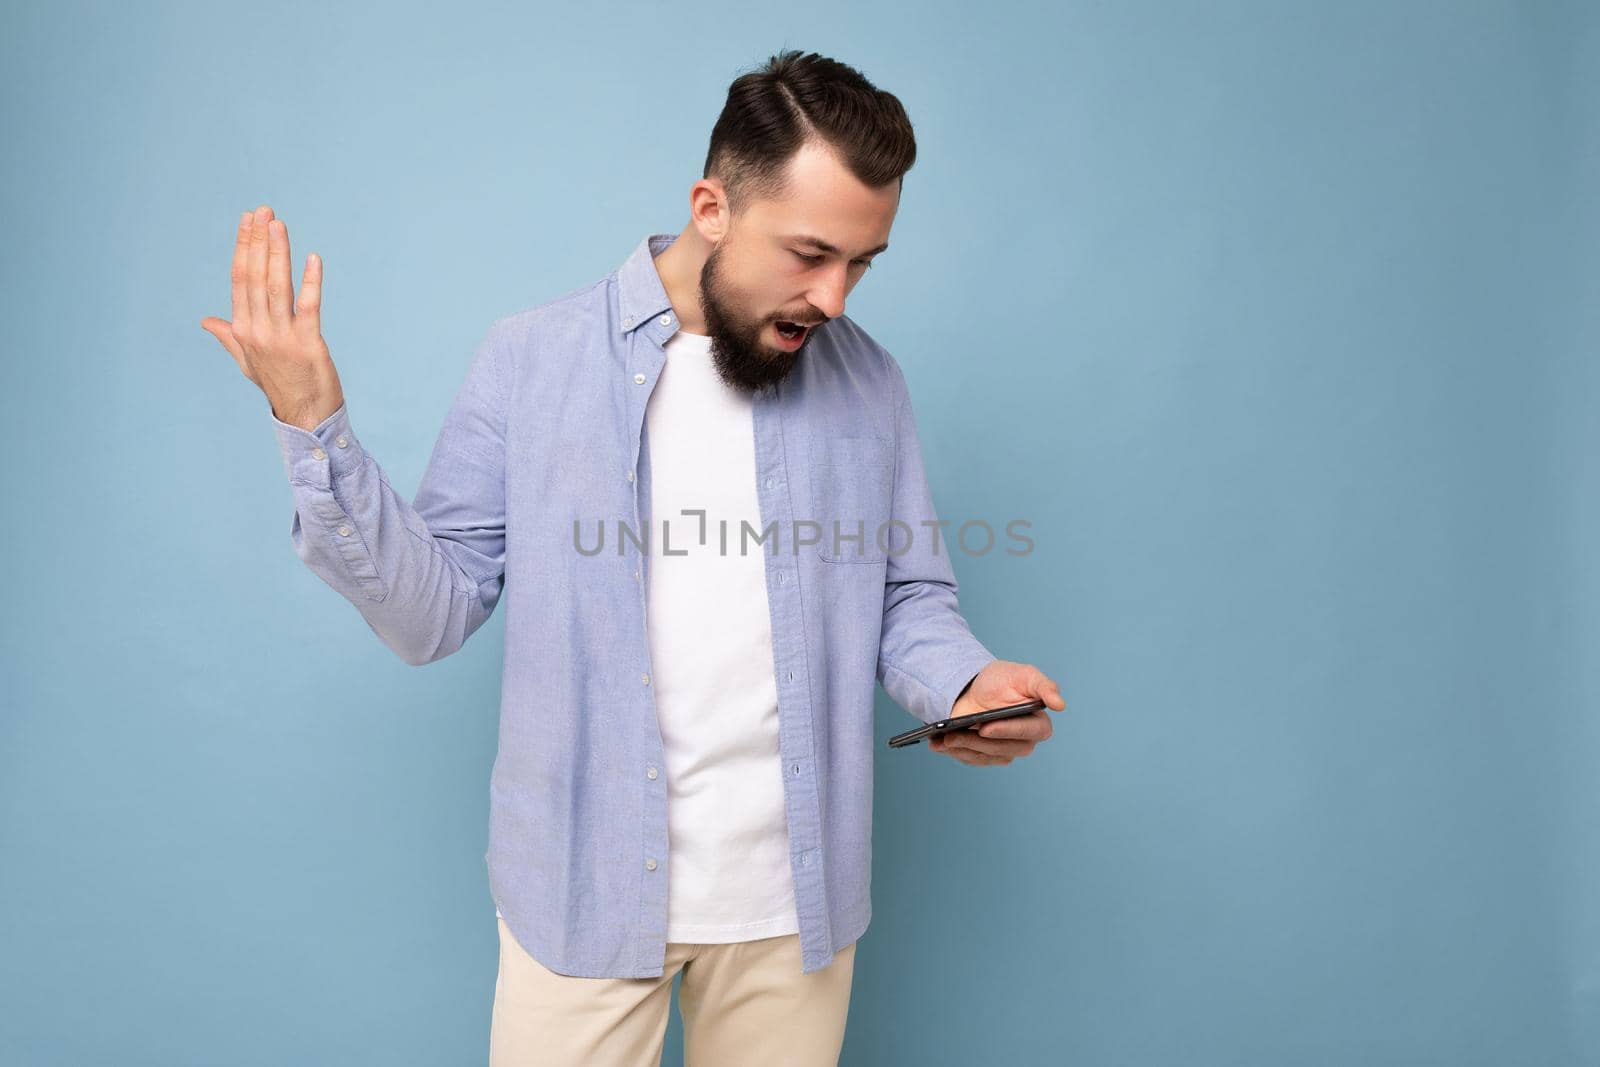 Photo shot of dissatisfied handsome bearded good looking young man wearing casual stylish outfit poising isolated on background with empty space holding in hand and using mobile phone messaging sms looking at smartphone display screen.